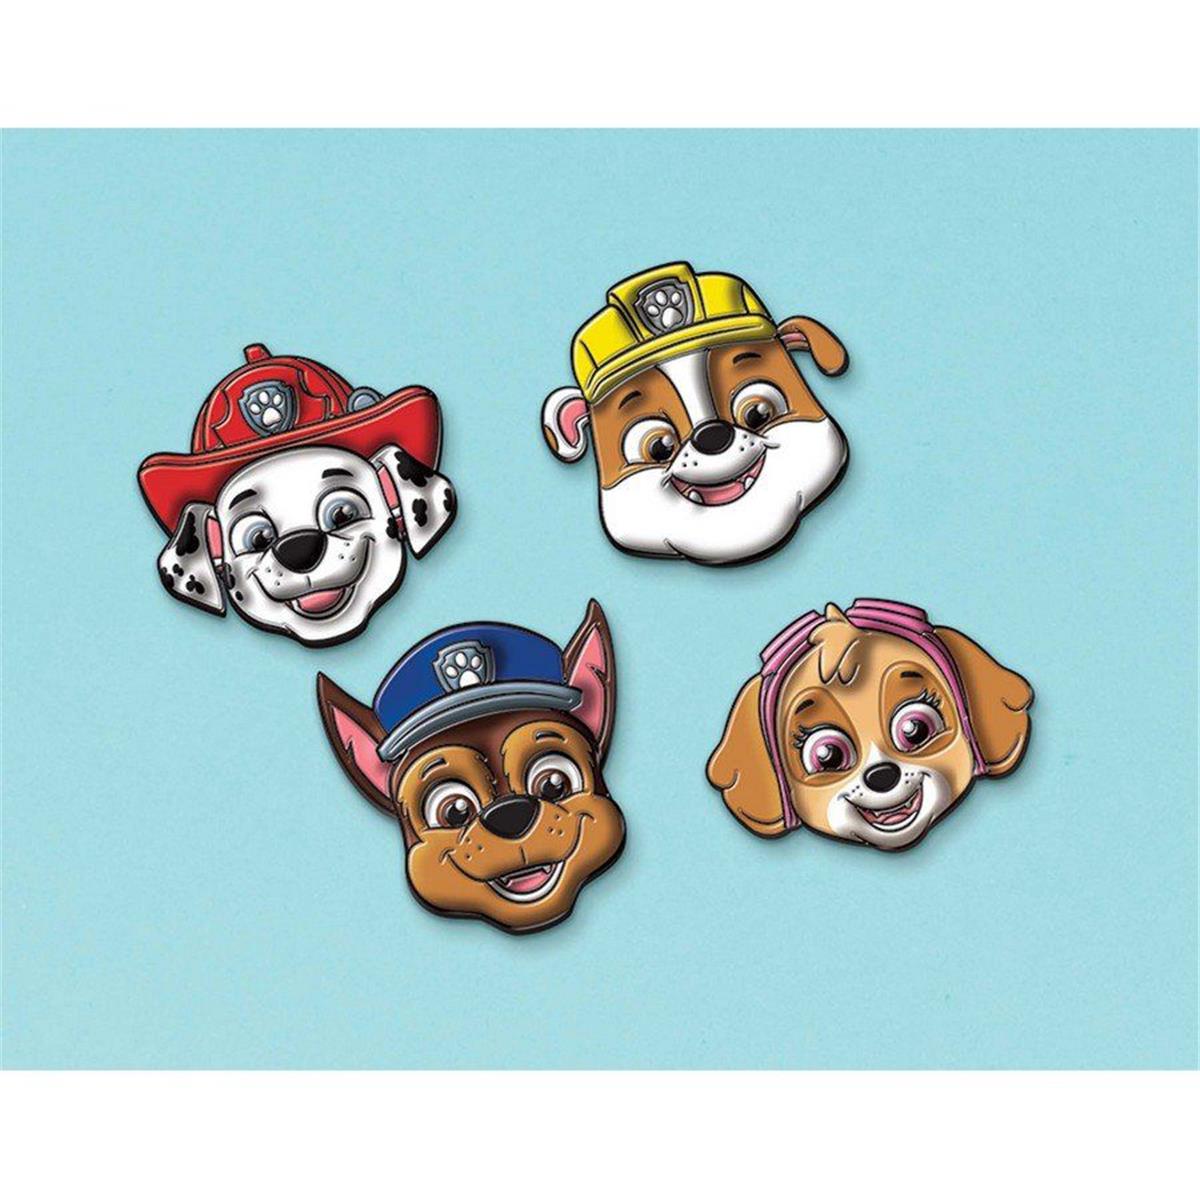 Picture of Amscan 639380 Paw Patrol Adventures Character Stickies Favors - Pack of 4